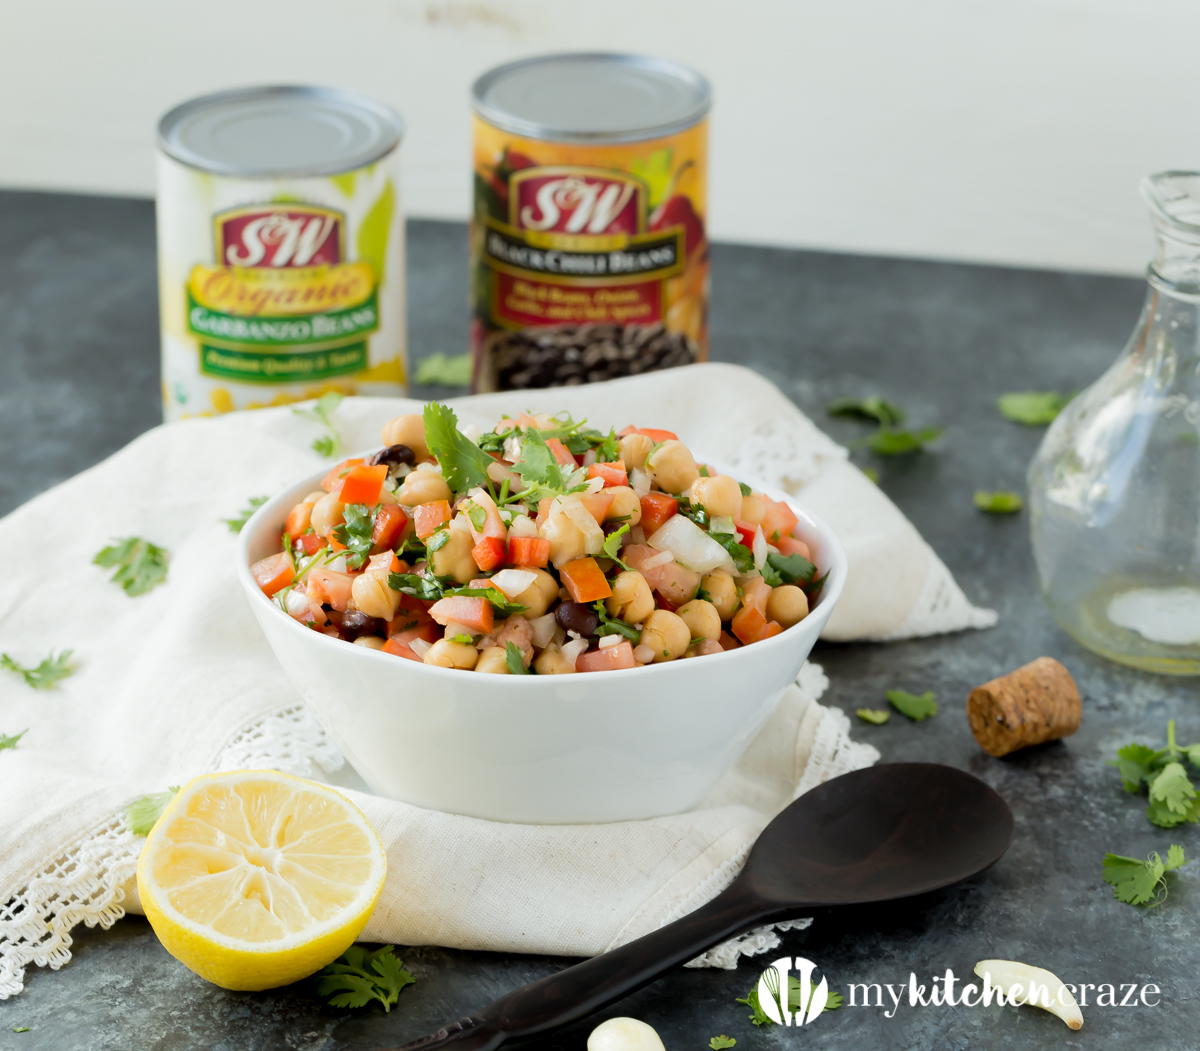 Simple, easy and fresh ingredients are the key to this delicious Tomato Chickpea Salad. You can use it as a side dish or eat it as the main with some protein. Either way, this salad is yummy.